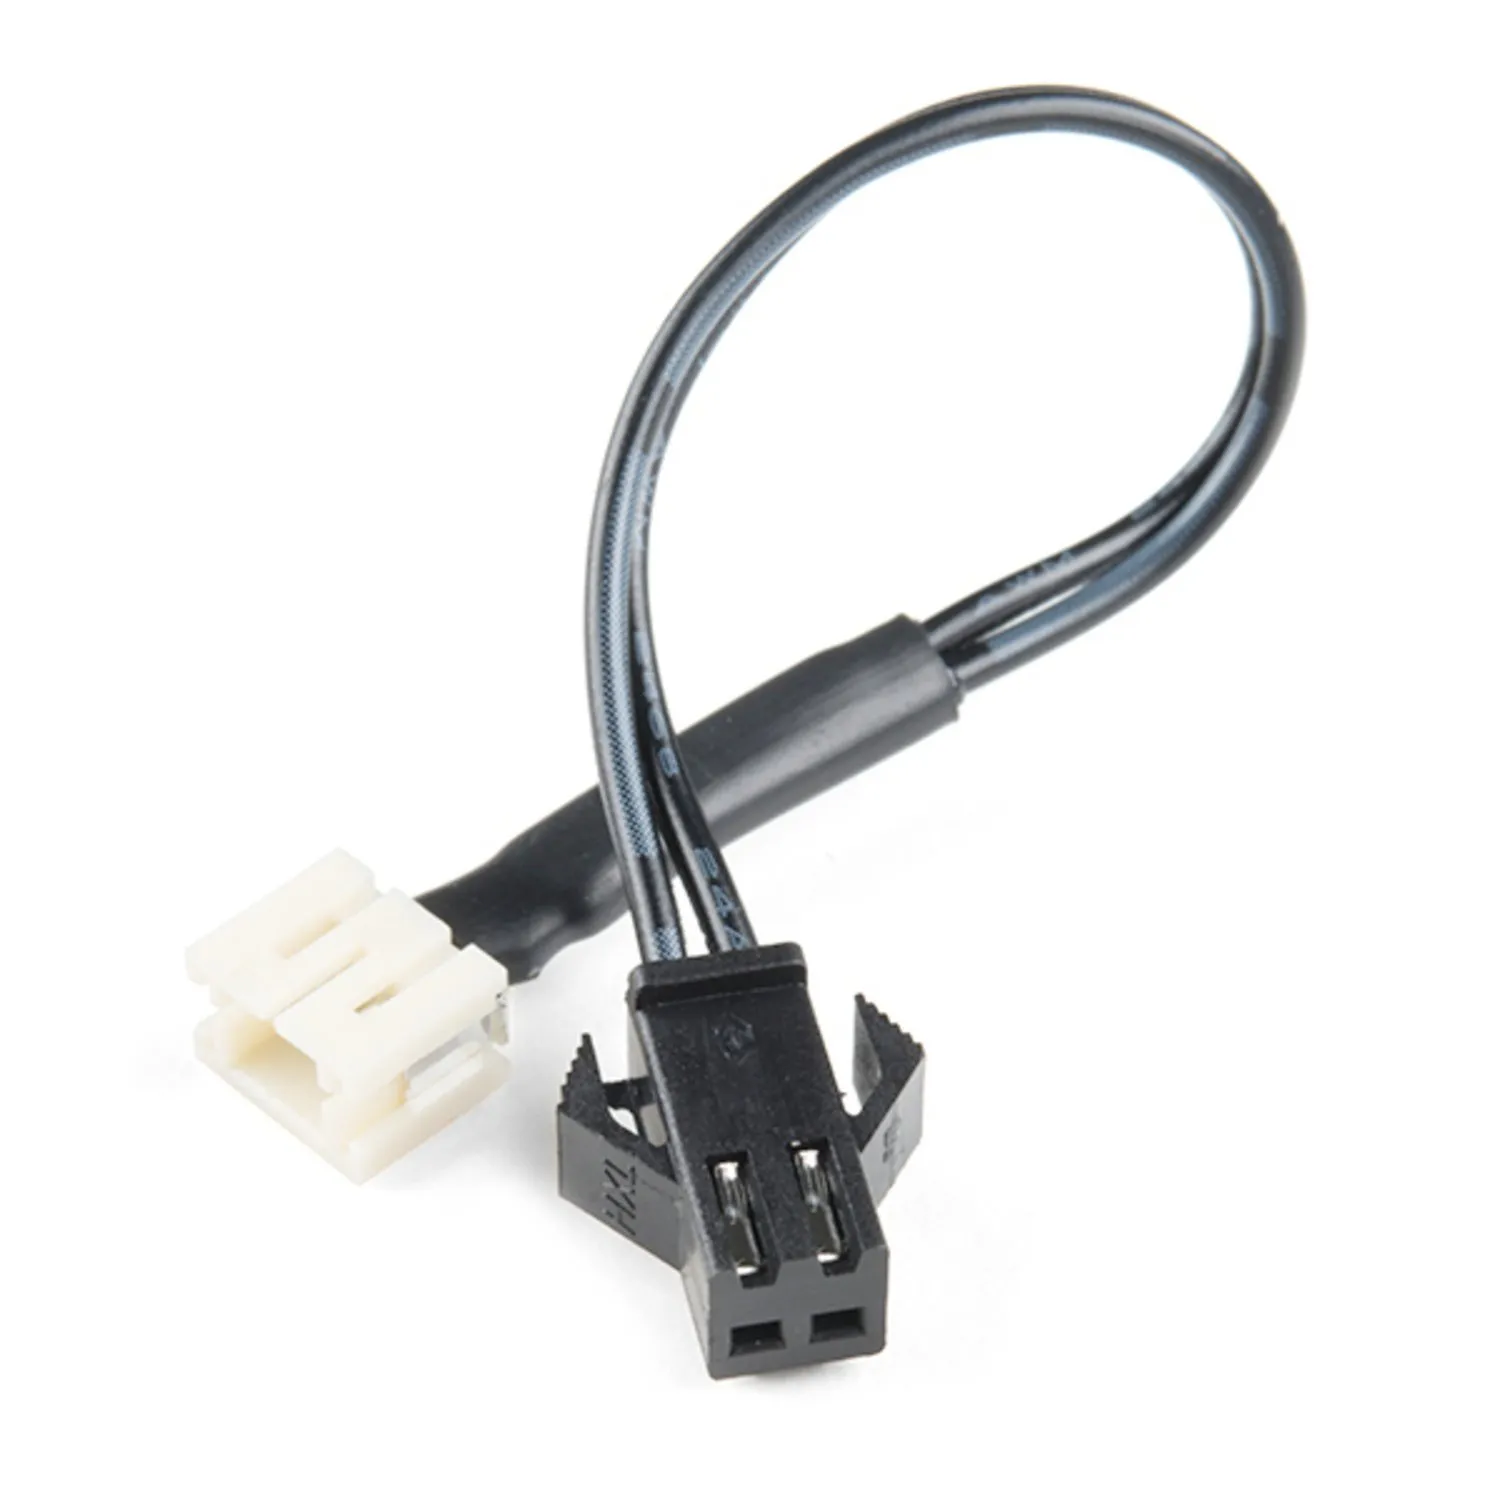 Photo of JST-PH Male to JST-SM Female Adapter